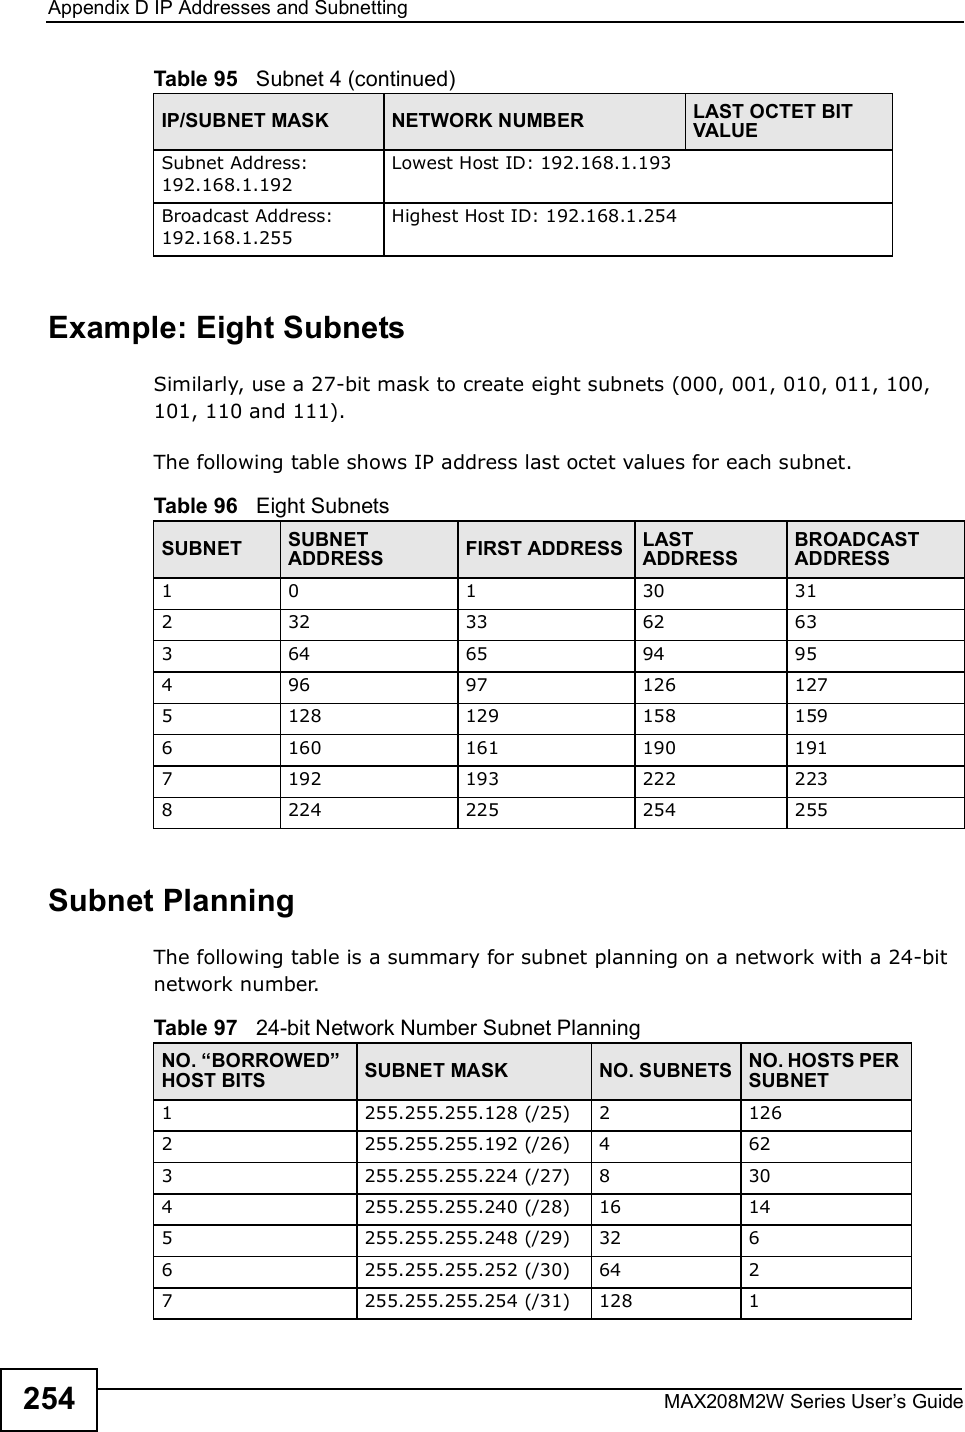 Appendix DIP Addresses and SubnettingMAX208M2W Series User s Guide254Example: Eight SubnetsSimilarly, use a 27-bit mask to create eight subnets (000, 001, 010, 011, 100, 101, 110 and 111). The following table shows IP address last octet values for each subnet.Subnet PlanningThe following table is a summary for subnet planning on a network with a 24-bit network number.Subnet Address: 192.168.1.192Lowest Host ID: 192.168.1.193Broadcast Address: 192.168.1.255Highest Host ID: 192.168.1.254Table 95   Subnet 4 (continued)IP/SUBNET MASK NETWORK NUMBER LAST OCTET BIT VALUETable 96   Eight SubnetsSUBNET SUBNET ADDRESS FIRST ADDRESS LAST ADDRESSBROADCAST ADDRESS1 0 1 30 31232 33 62 63364 65 94 95496 97 126 1275 128 129 158 1596 160 161 190 1917 192 193 222 2238 224 225 254 255Table 97   24-bit Network Number Subnet PlanningNO. #BORROWED$ HOST BITS SUBNET MASK NO. SUBNETS NO. HOSTS PER SUBNET1255.255.255.128 (/25) 2 1262255.255.255.192 (/26) 4 623 255.255.255.224 (/27) 8 304 255.255.255.240 (/28) 16 145 255.255.255.248 (/29) 32 66 255.255.255.252 (/30) 64 27 255.255.255.254 (/31) 128 1